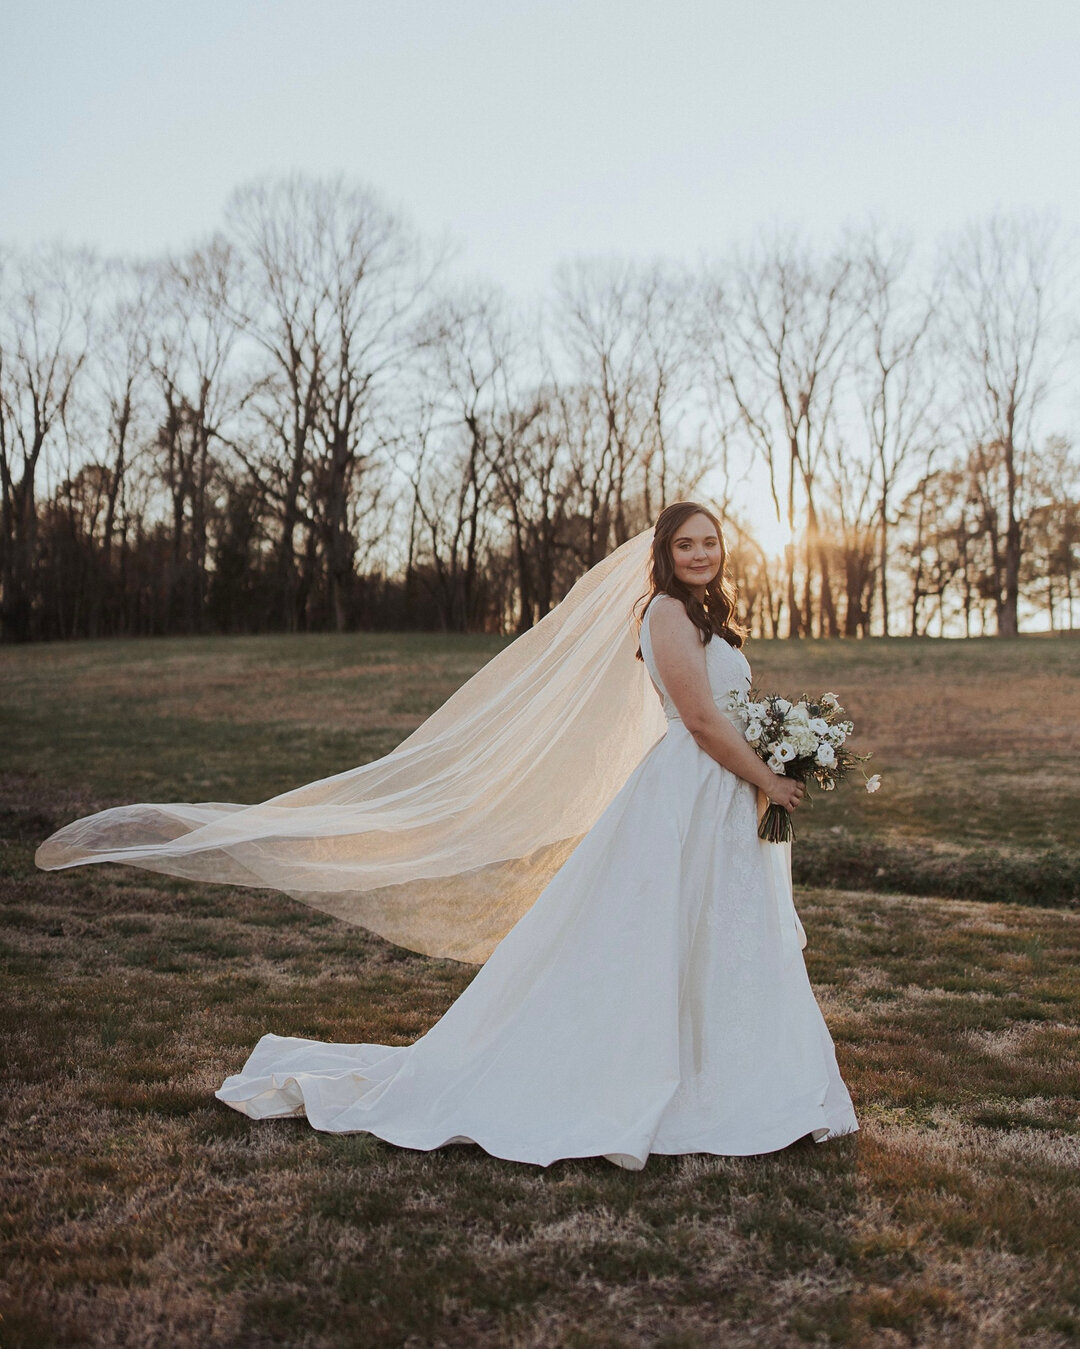 Who can say no to a veil like that 😍 ​​​​​​​​
​​​​​​​​
Bride and Groom: @katiehayeskimbrough and Jacob Kimbrough​​​​​​​​
Hair: @bridal_hair_huntsville ​​​​​​​​
Makeup: @nancyfinneganmua ​​​​​​​​
Venue: @whistle_hollow ​​​​​​​​
Photographer: @kelseys